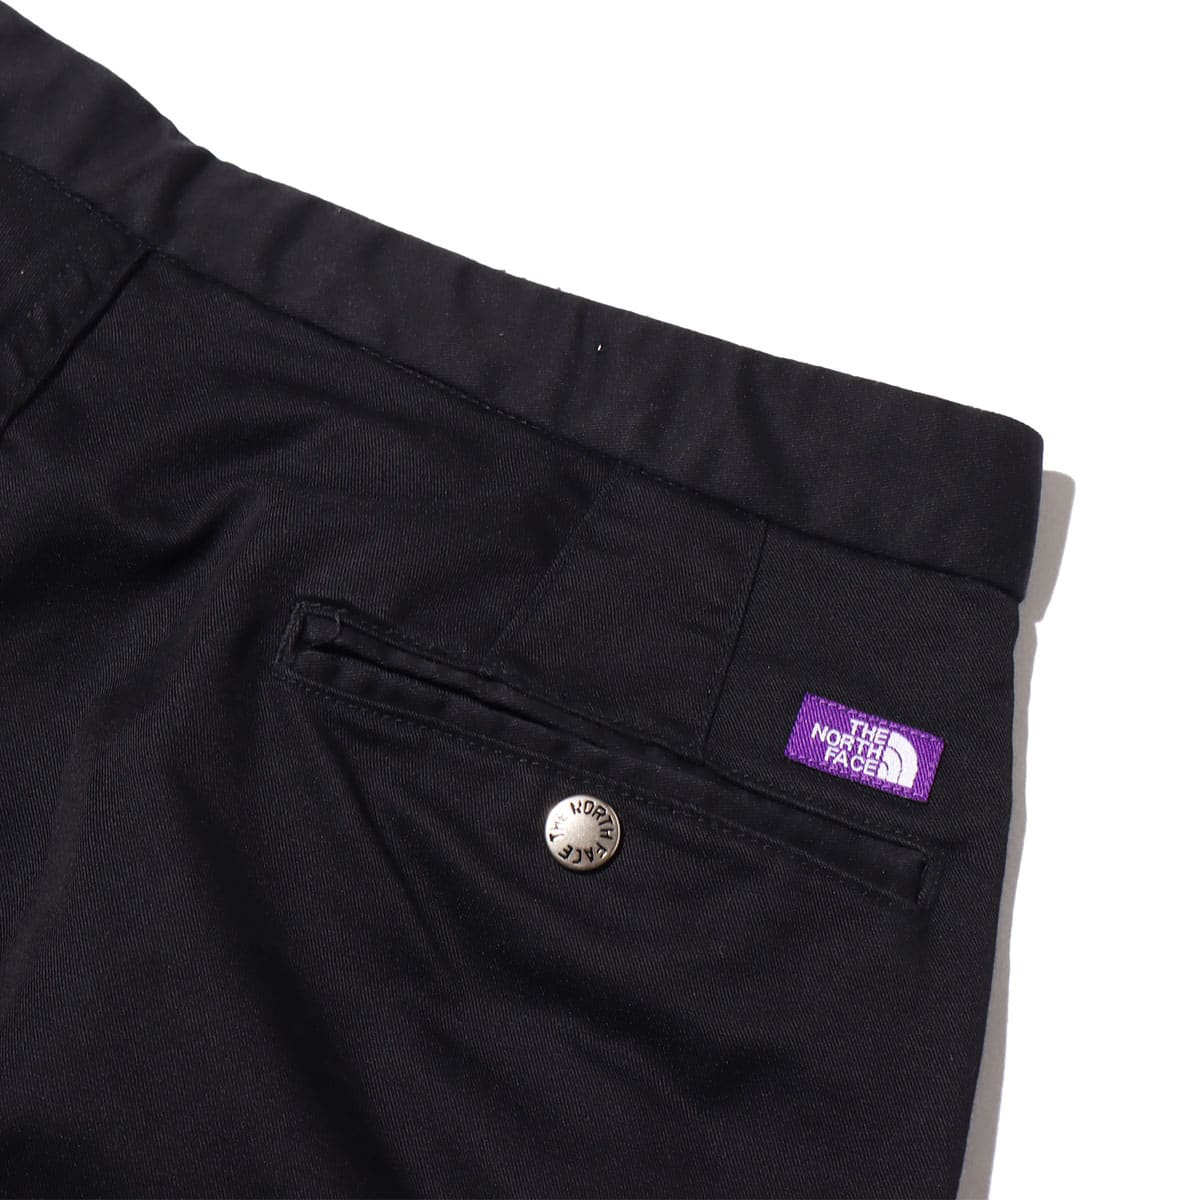 THE NORTH FACE PURPLE LABEL STRETCH TWILL WIDE TAPERED PANTS BLACK